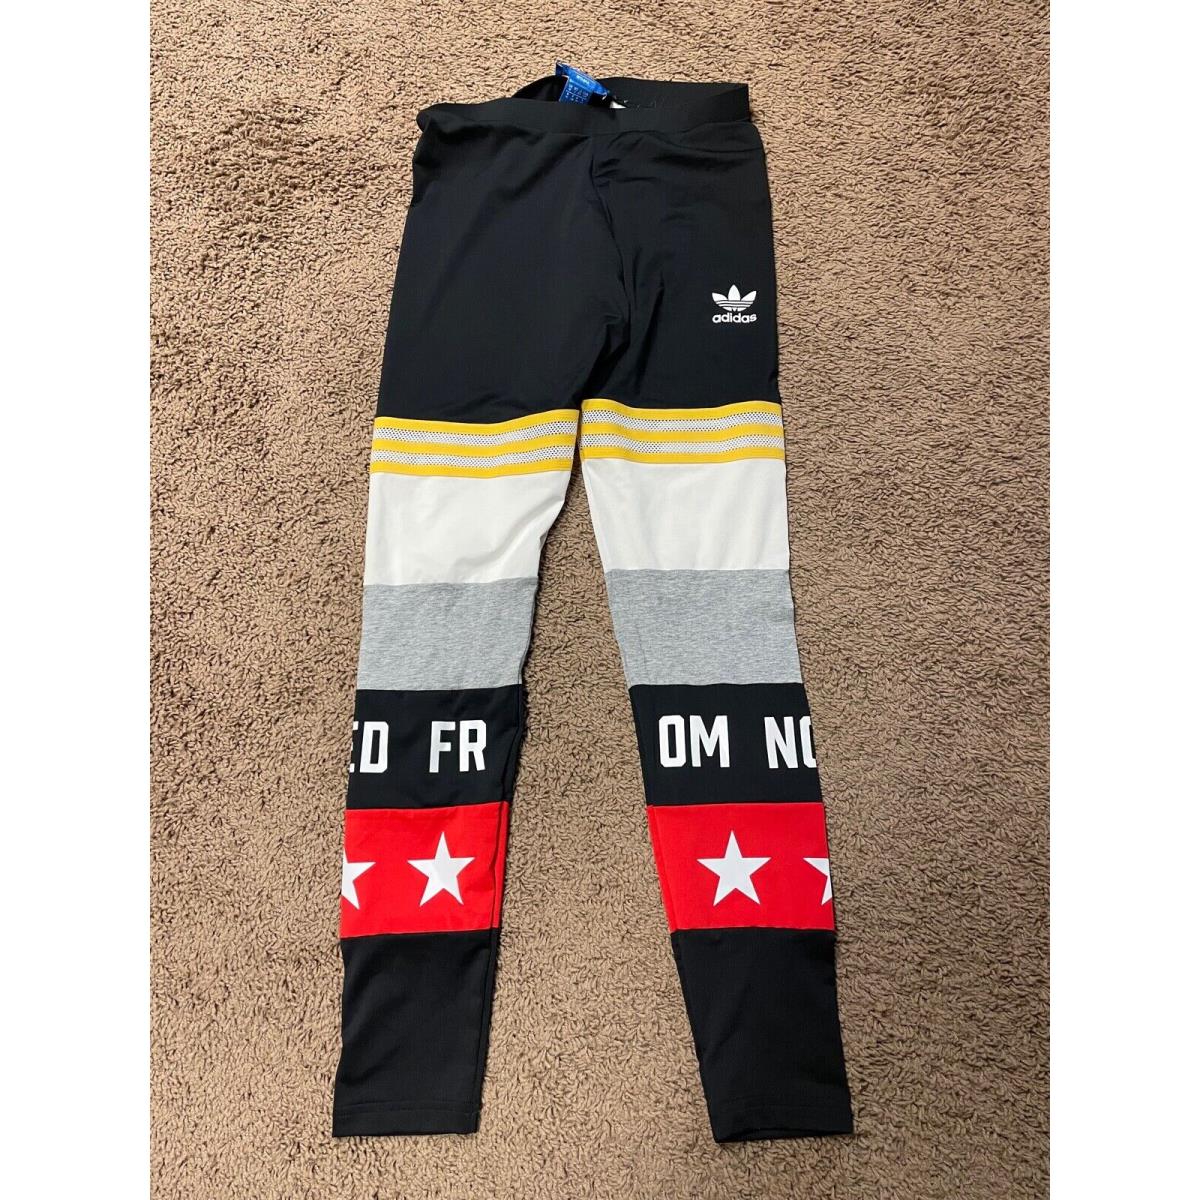 Adidas Originals Rita Ora Banned From Normal Kylie Jenner Leggings Size Small